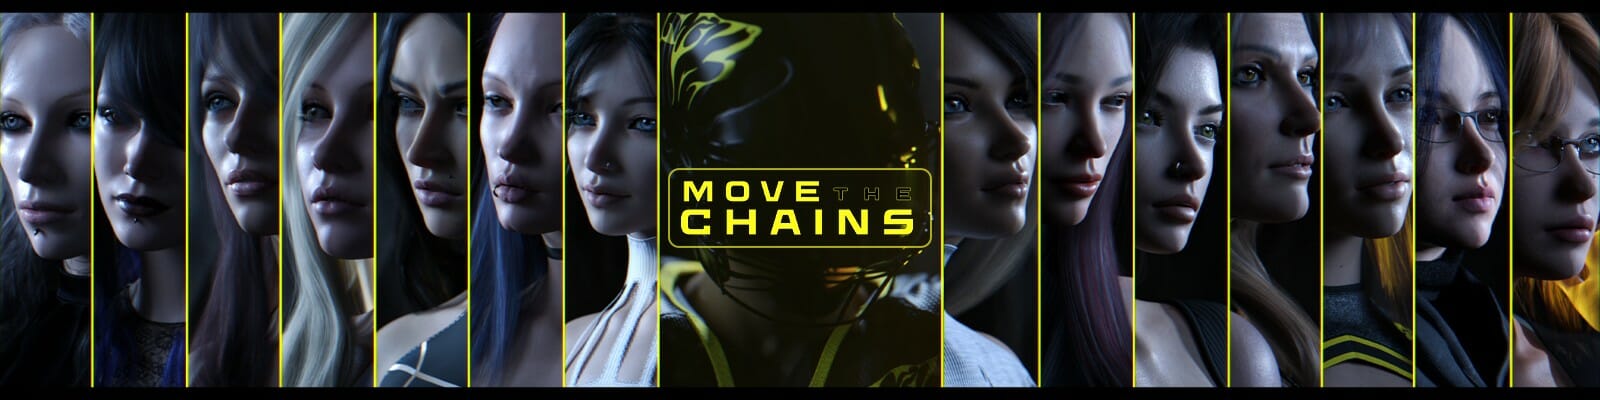 Move The Chains Adult Game Android Apk Download (13)